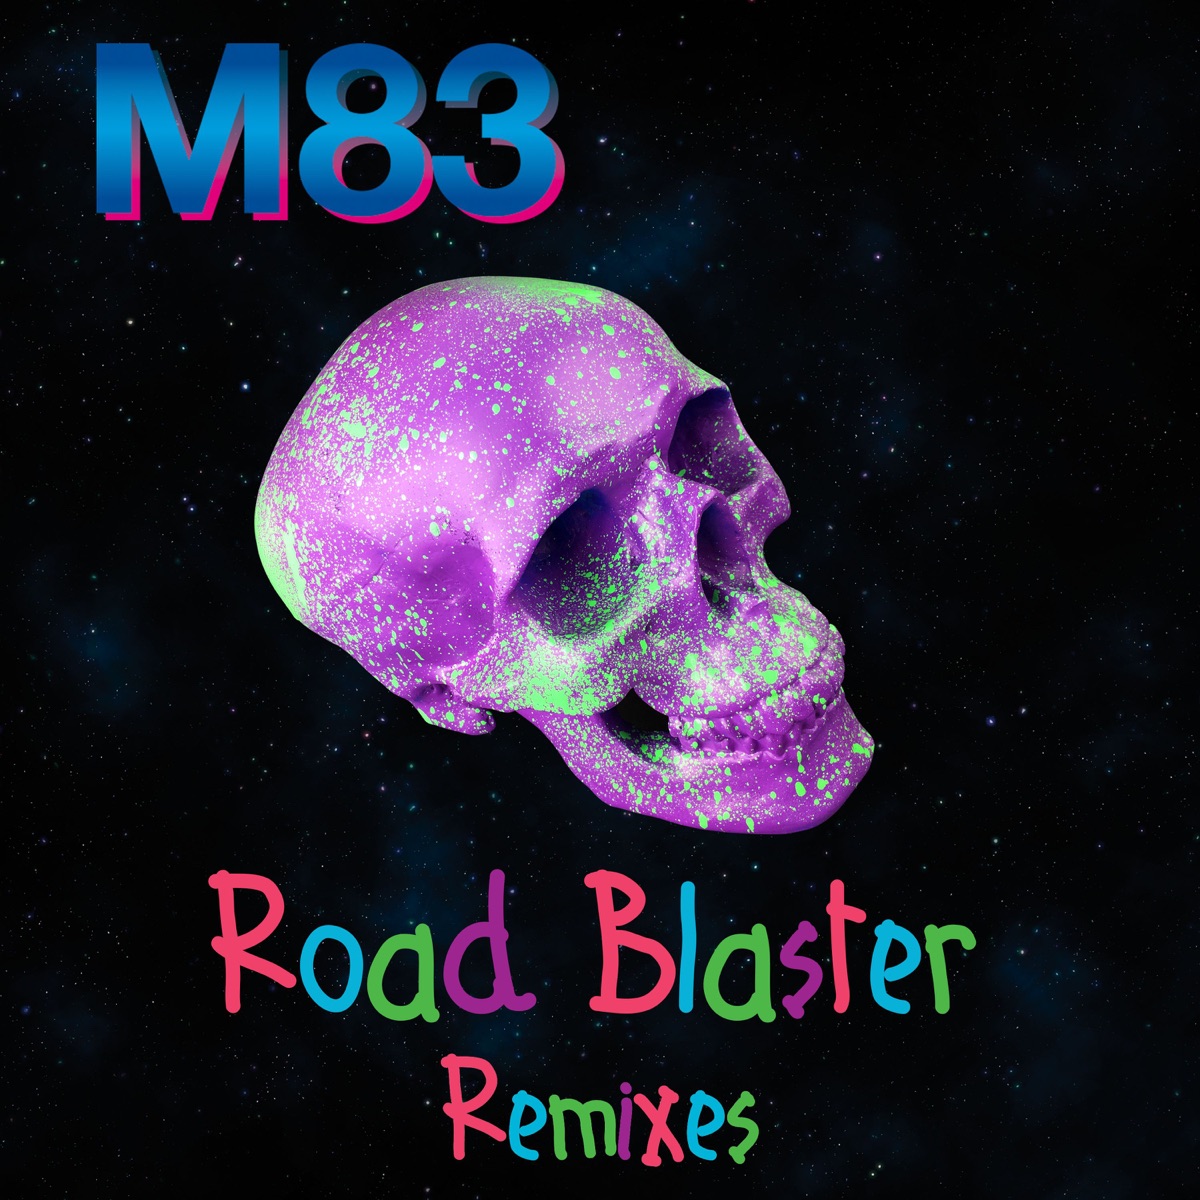 Hurry Up, We're Dreaming by M83 on Apple Music